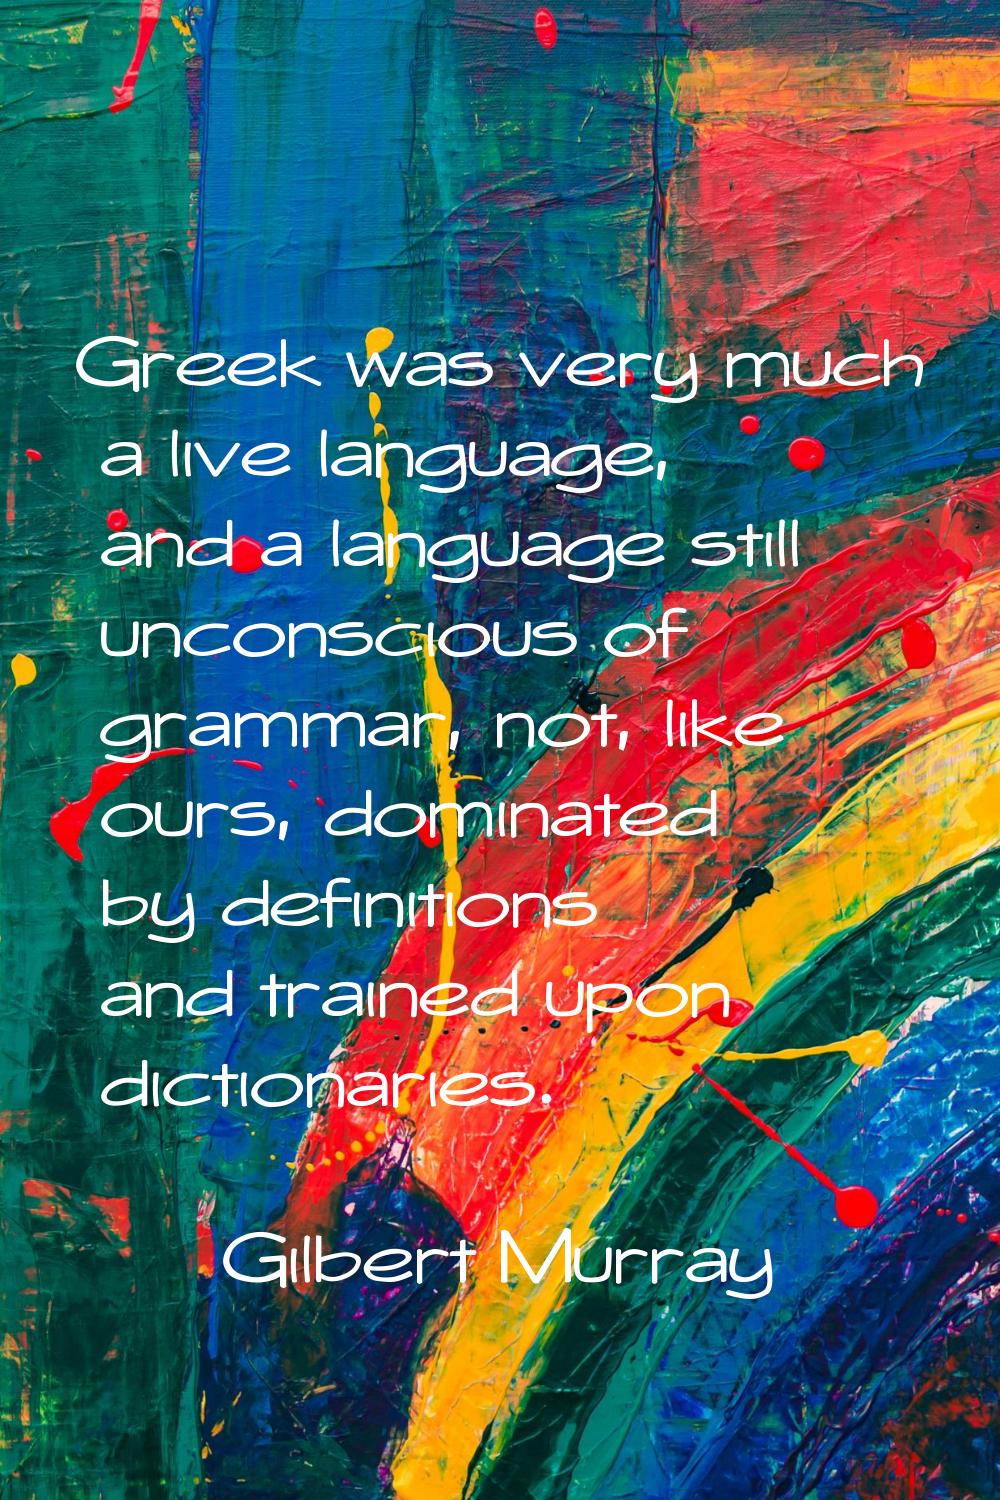 Greek was very much a live language, and a language still unconscious of grammar, not, like ours, d